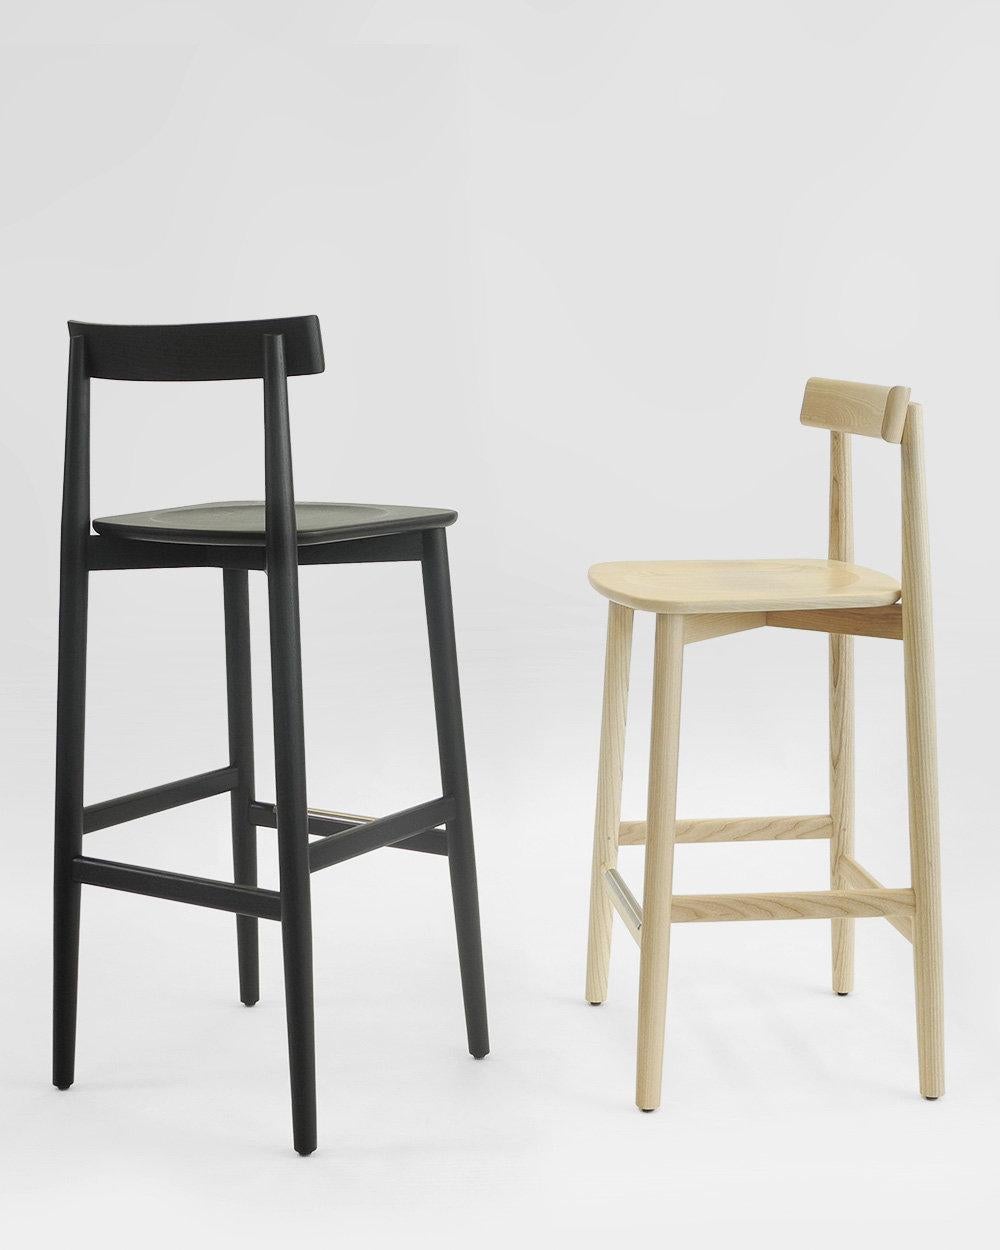 British L.Ercolani Lara Stool Designed by Dylan Freeth in Stock For Sale